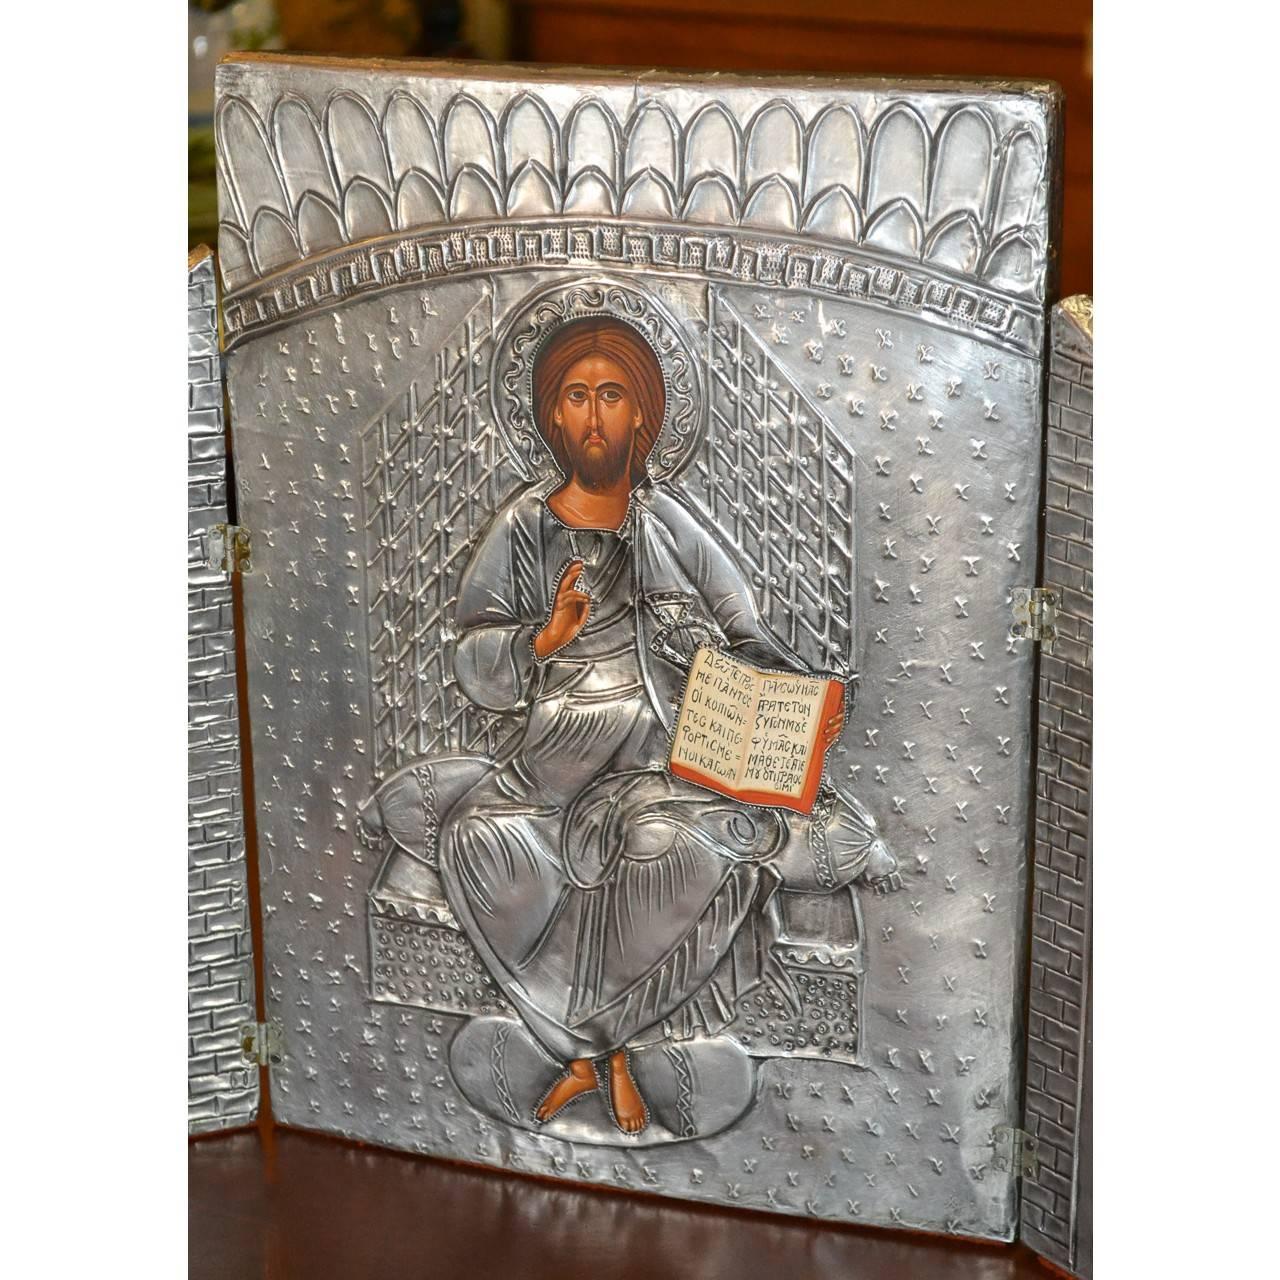 This icon was meticulously handmade using traditional techniques from the 15th century by P. Pappas of Dallas, Texas in the 1970s.
The back of the triptych is signed ALMIGHTY P. PAPPAS 15TH C
All silver work is handmade and the painted parts